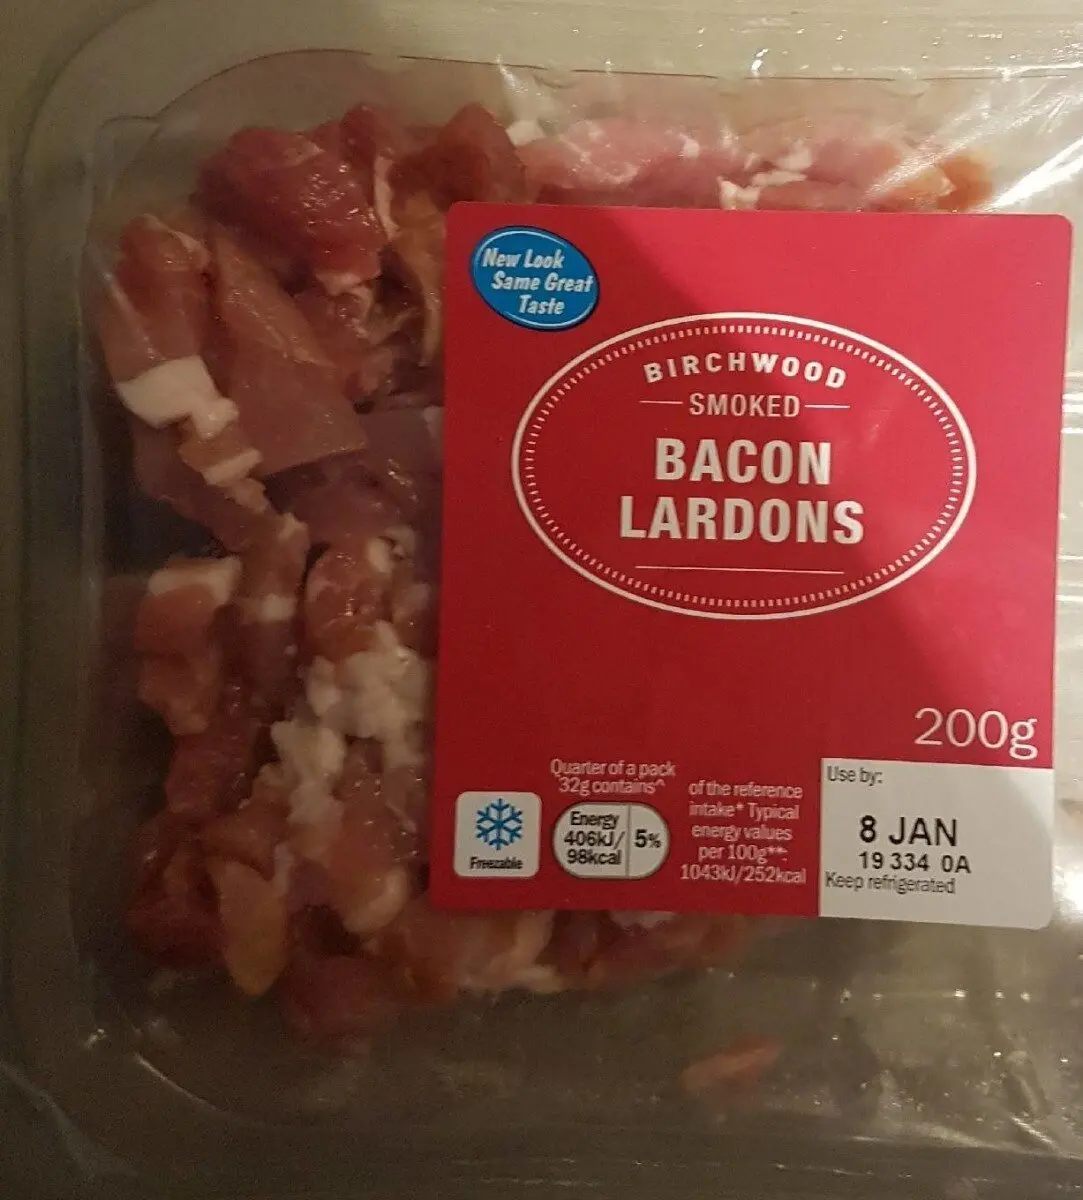 smoked pancetta lidl - Does Lidl sell clotted cream